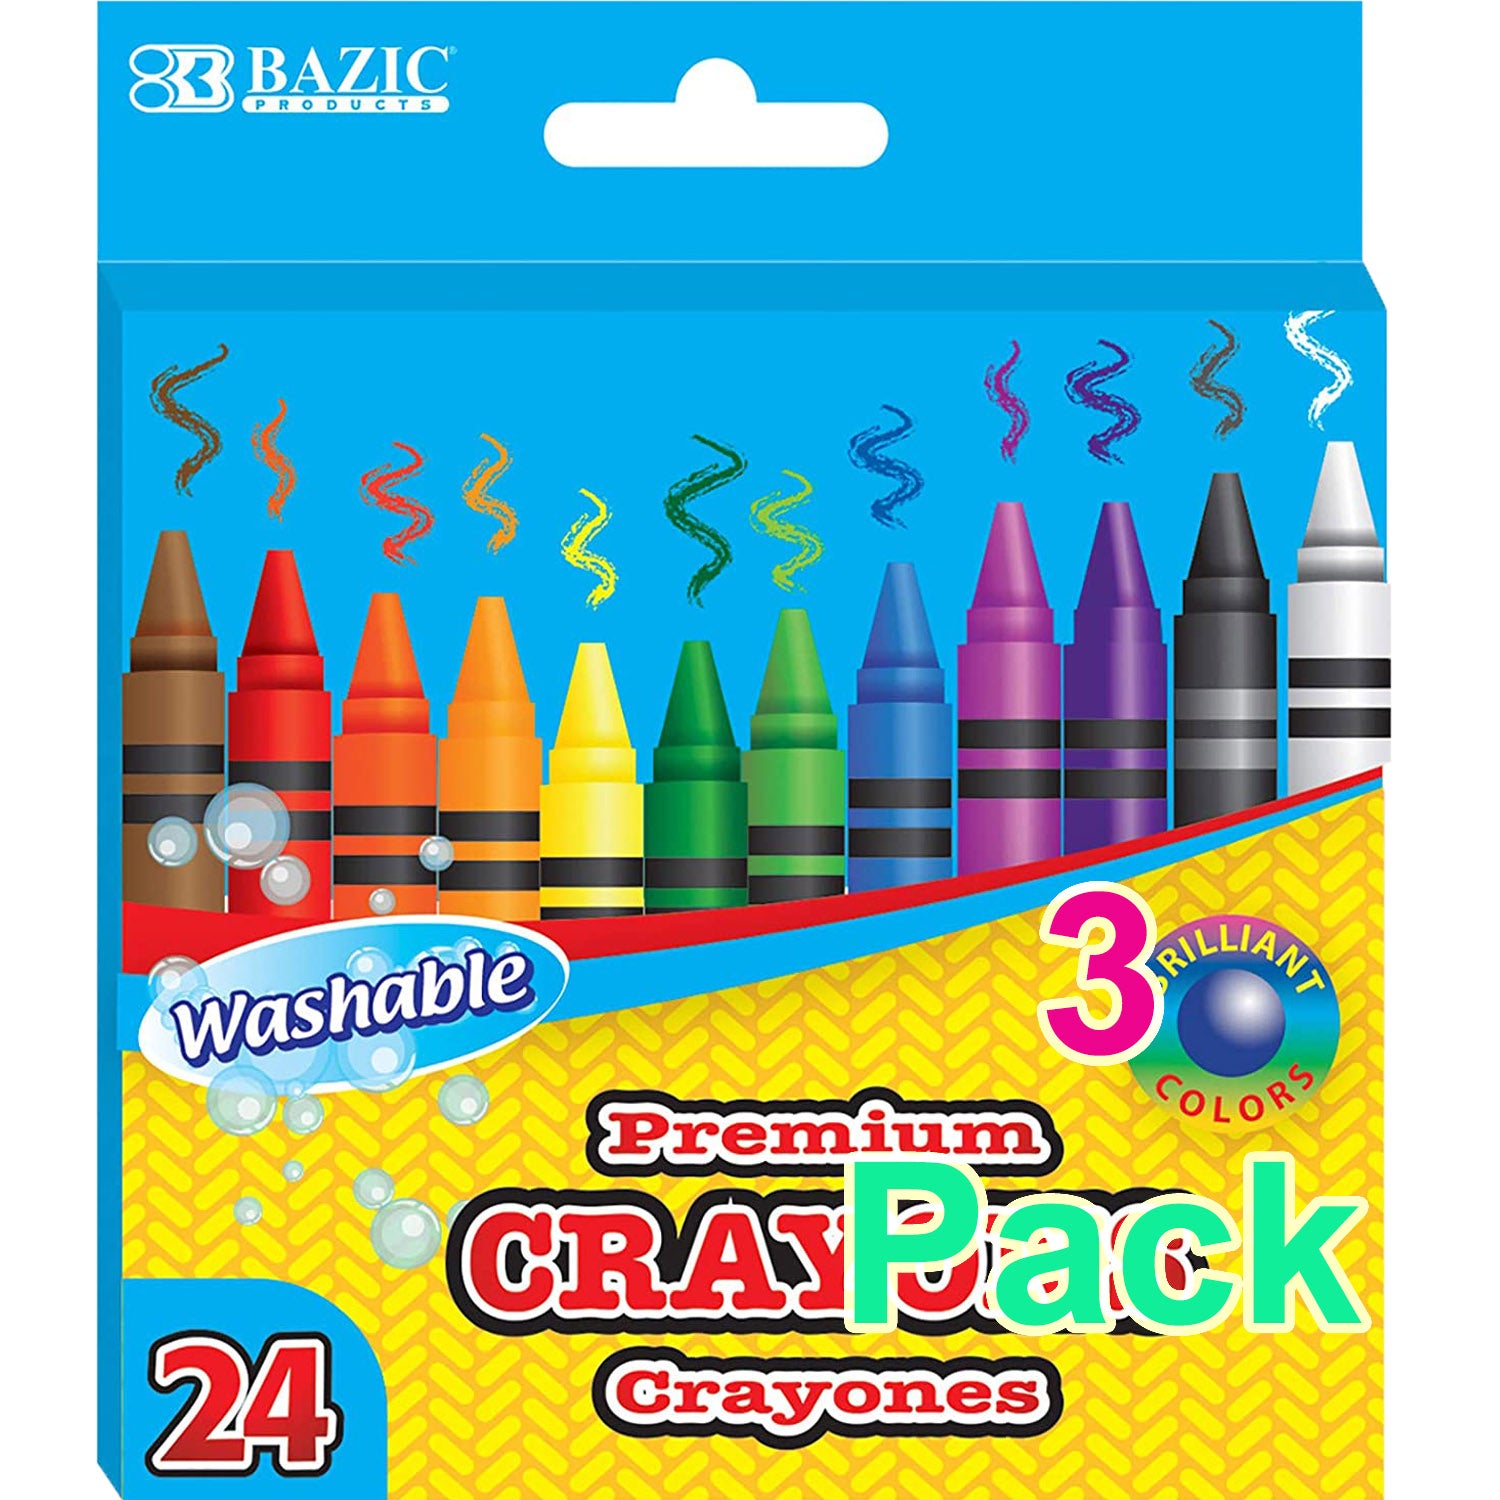 Premium Crayons Coloring SetAssorted Colors Washable - 24-Count3-Pack - G8 Central